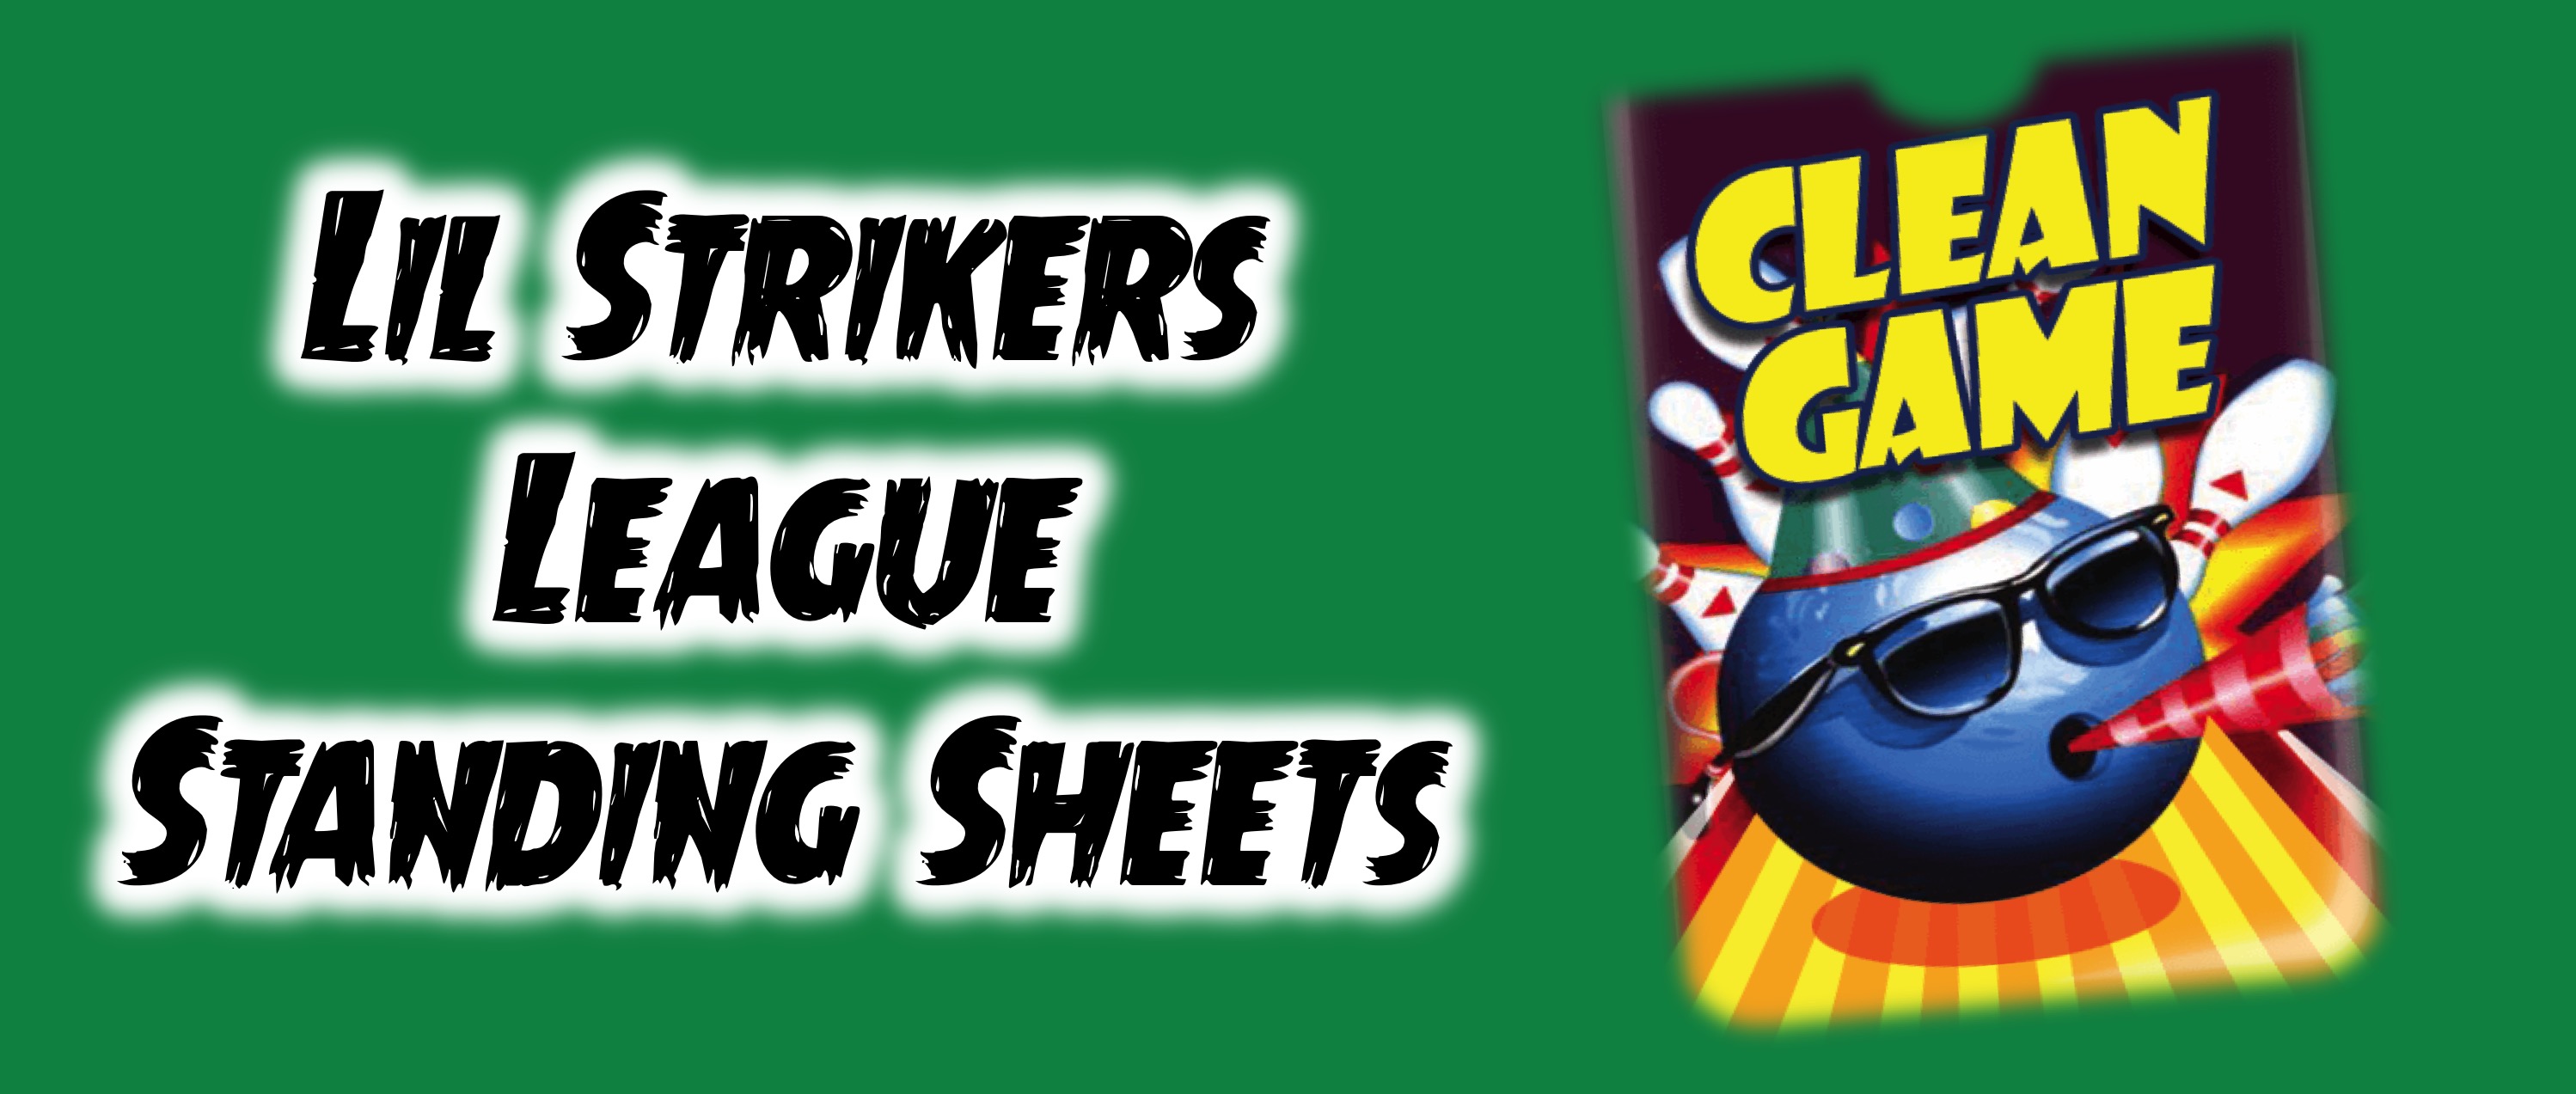 Lil Strikers League Standing Sheets